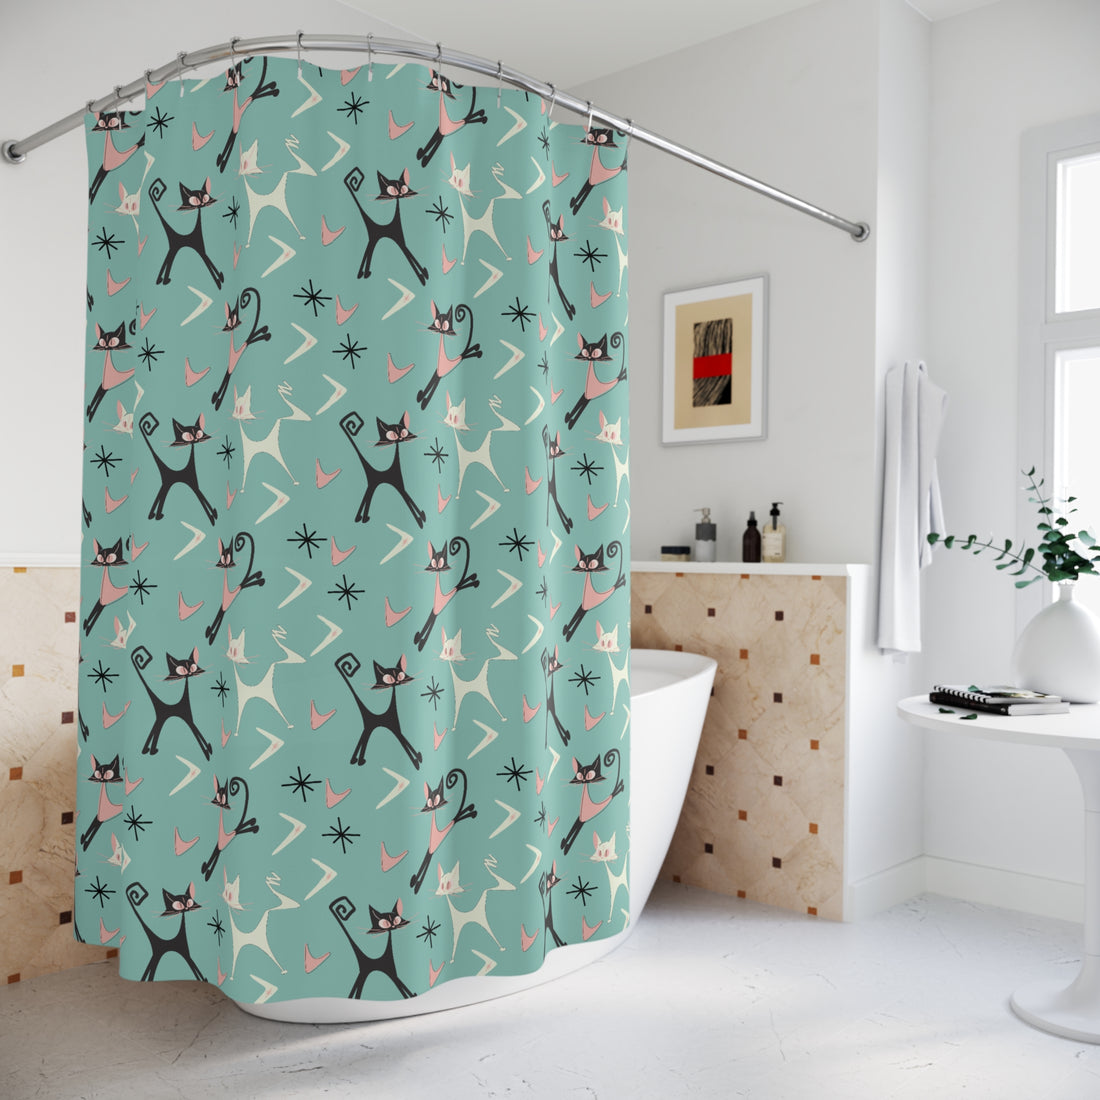 Atomic Cat Art Mid Century Modern Shower Curtain, Whimsical Quirky Cats, Boomerang, Aqua Pink, Kitschy 50s Curtain